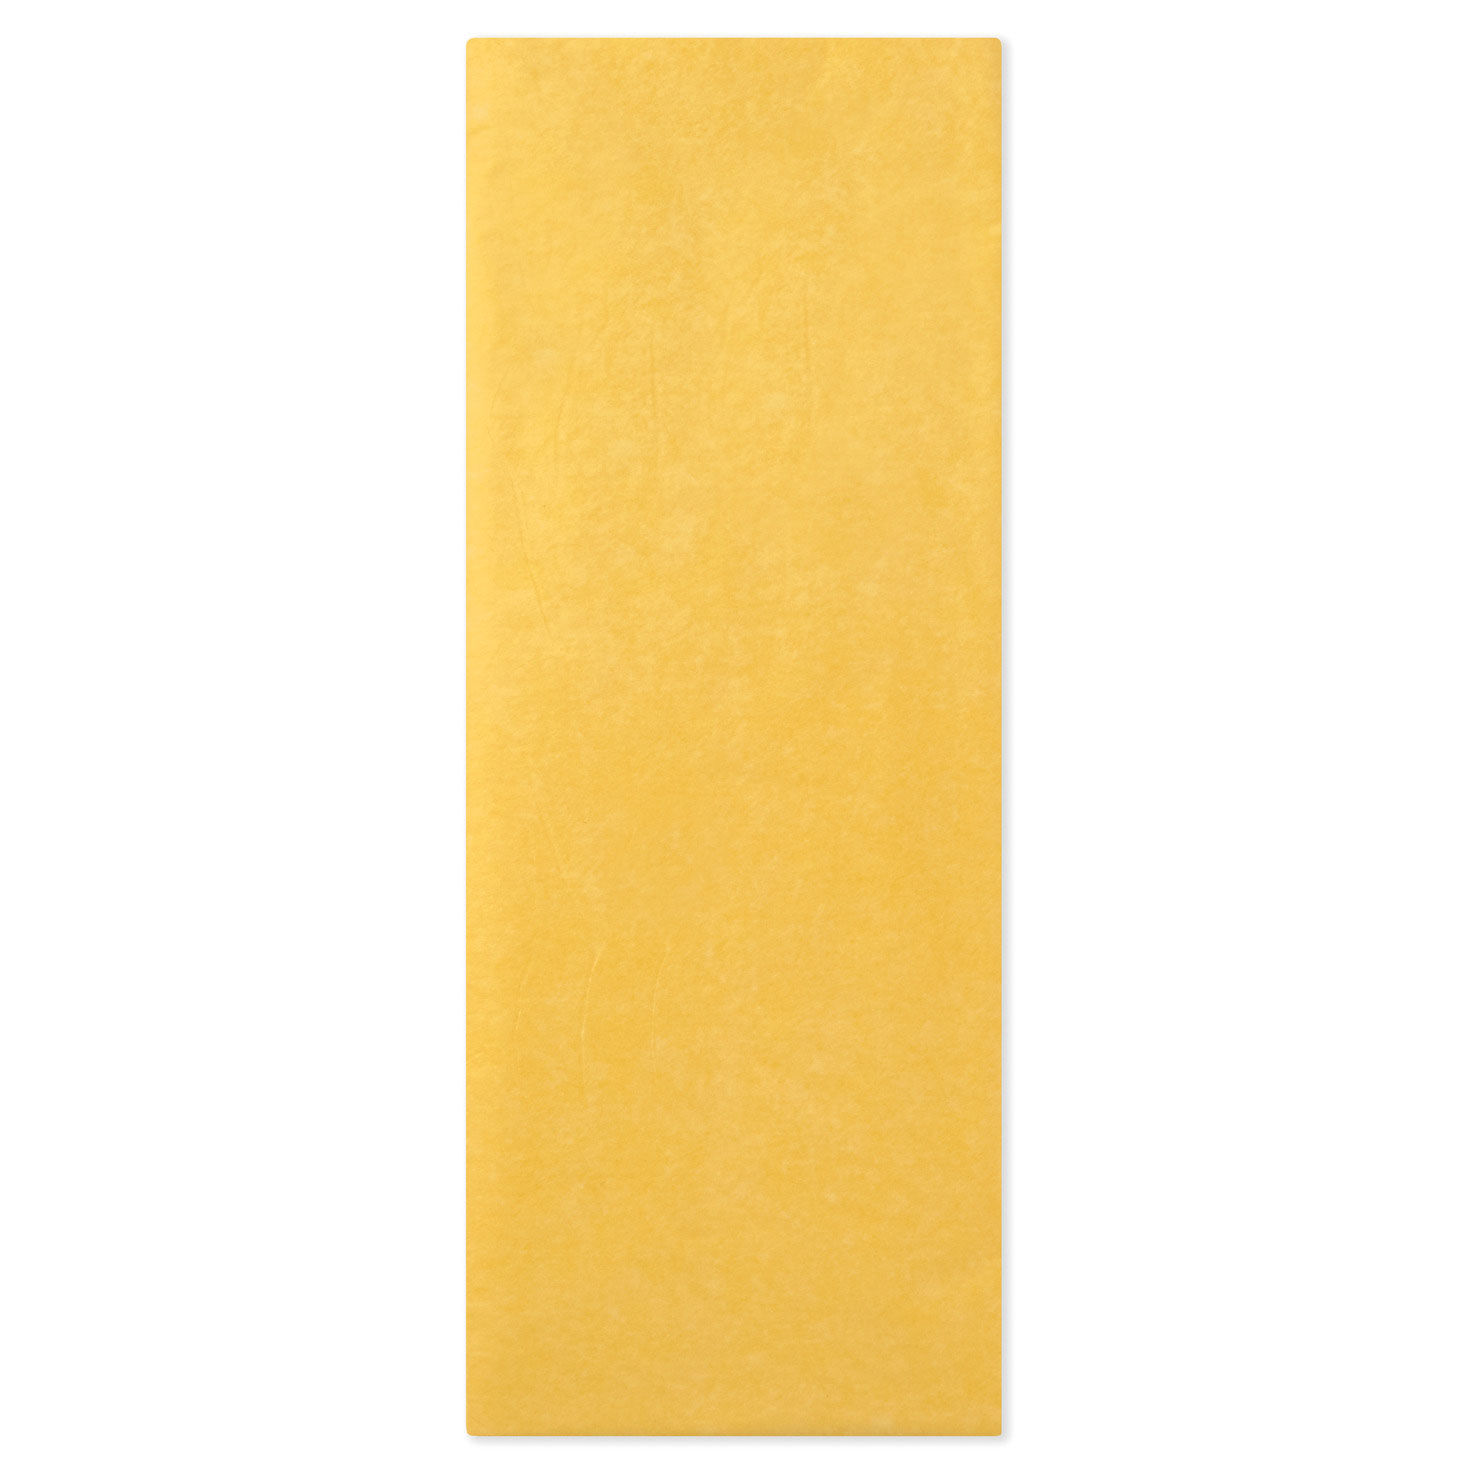 Pastel Yellow Gift Tissue Paper, 480 Unfolded Sheets 20 x 30